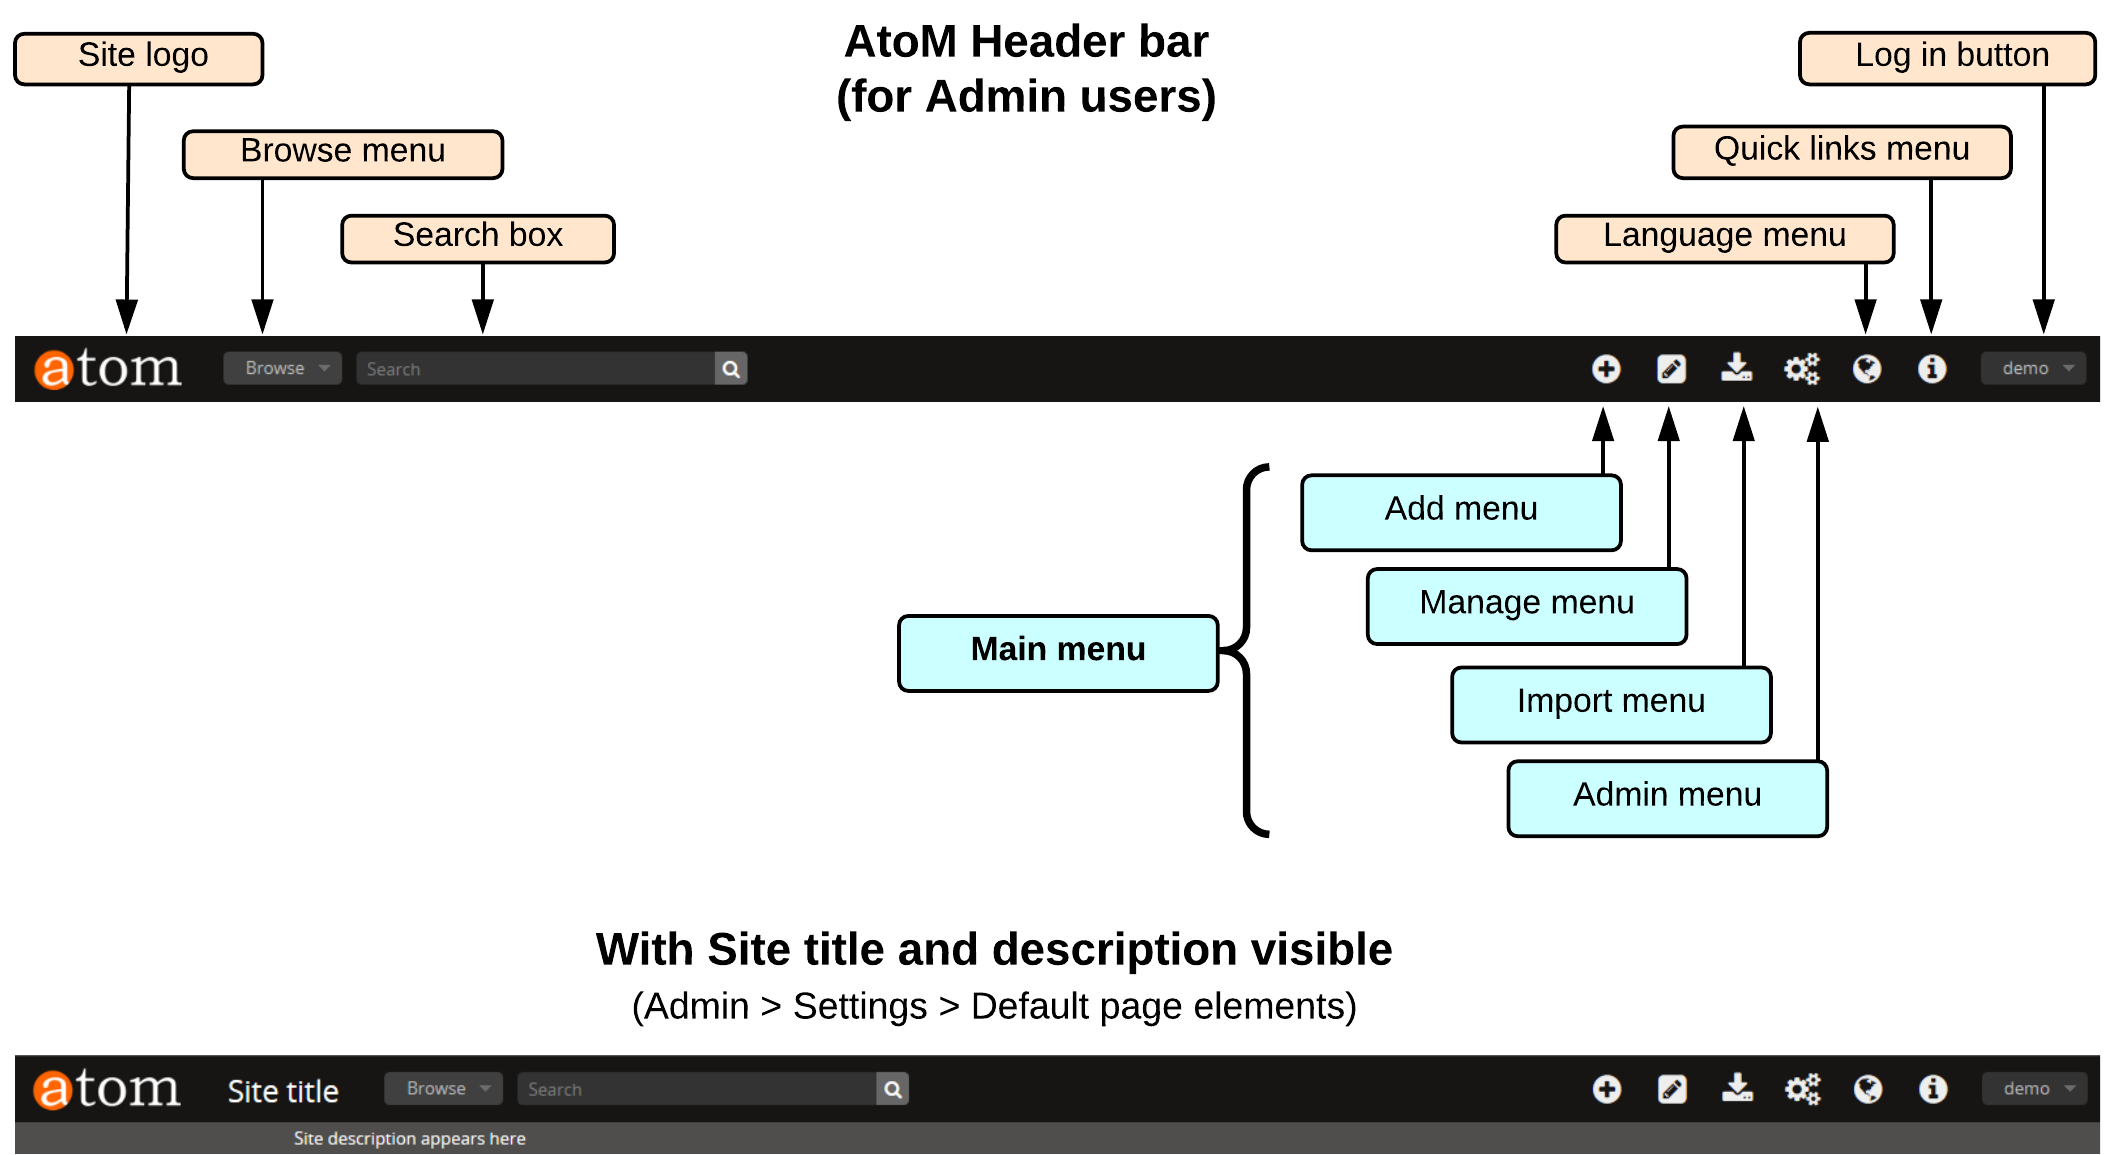 An image of the AtoM Header bar for Administrators